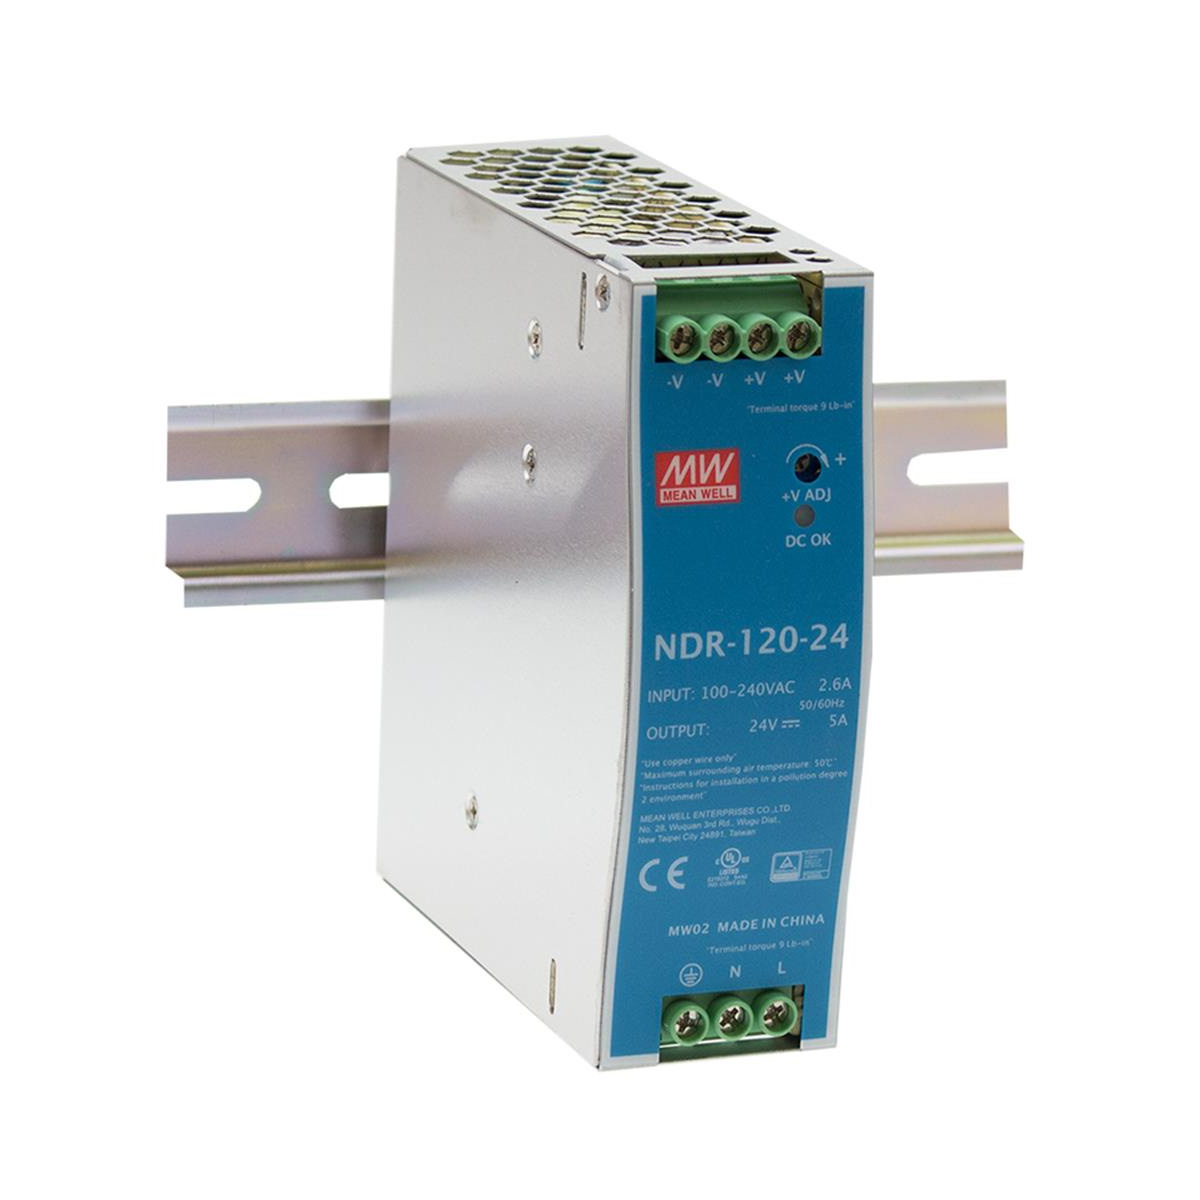 MEAN WELL power supply 24V  5A  120W stabilized, for DIN rail